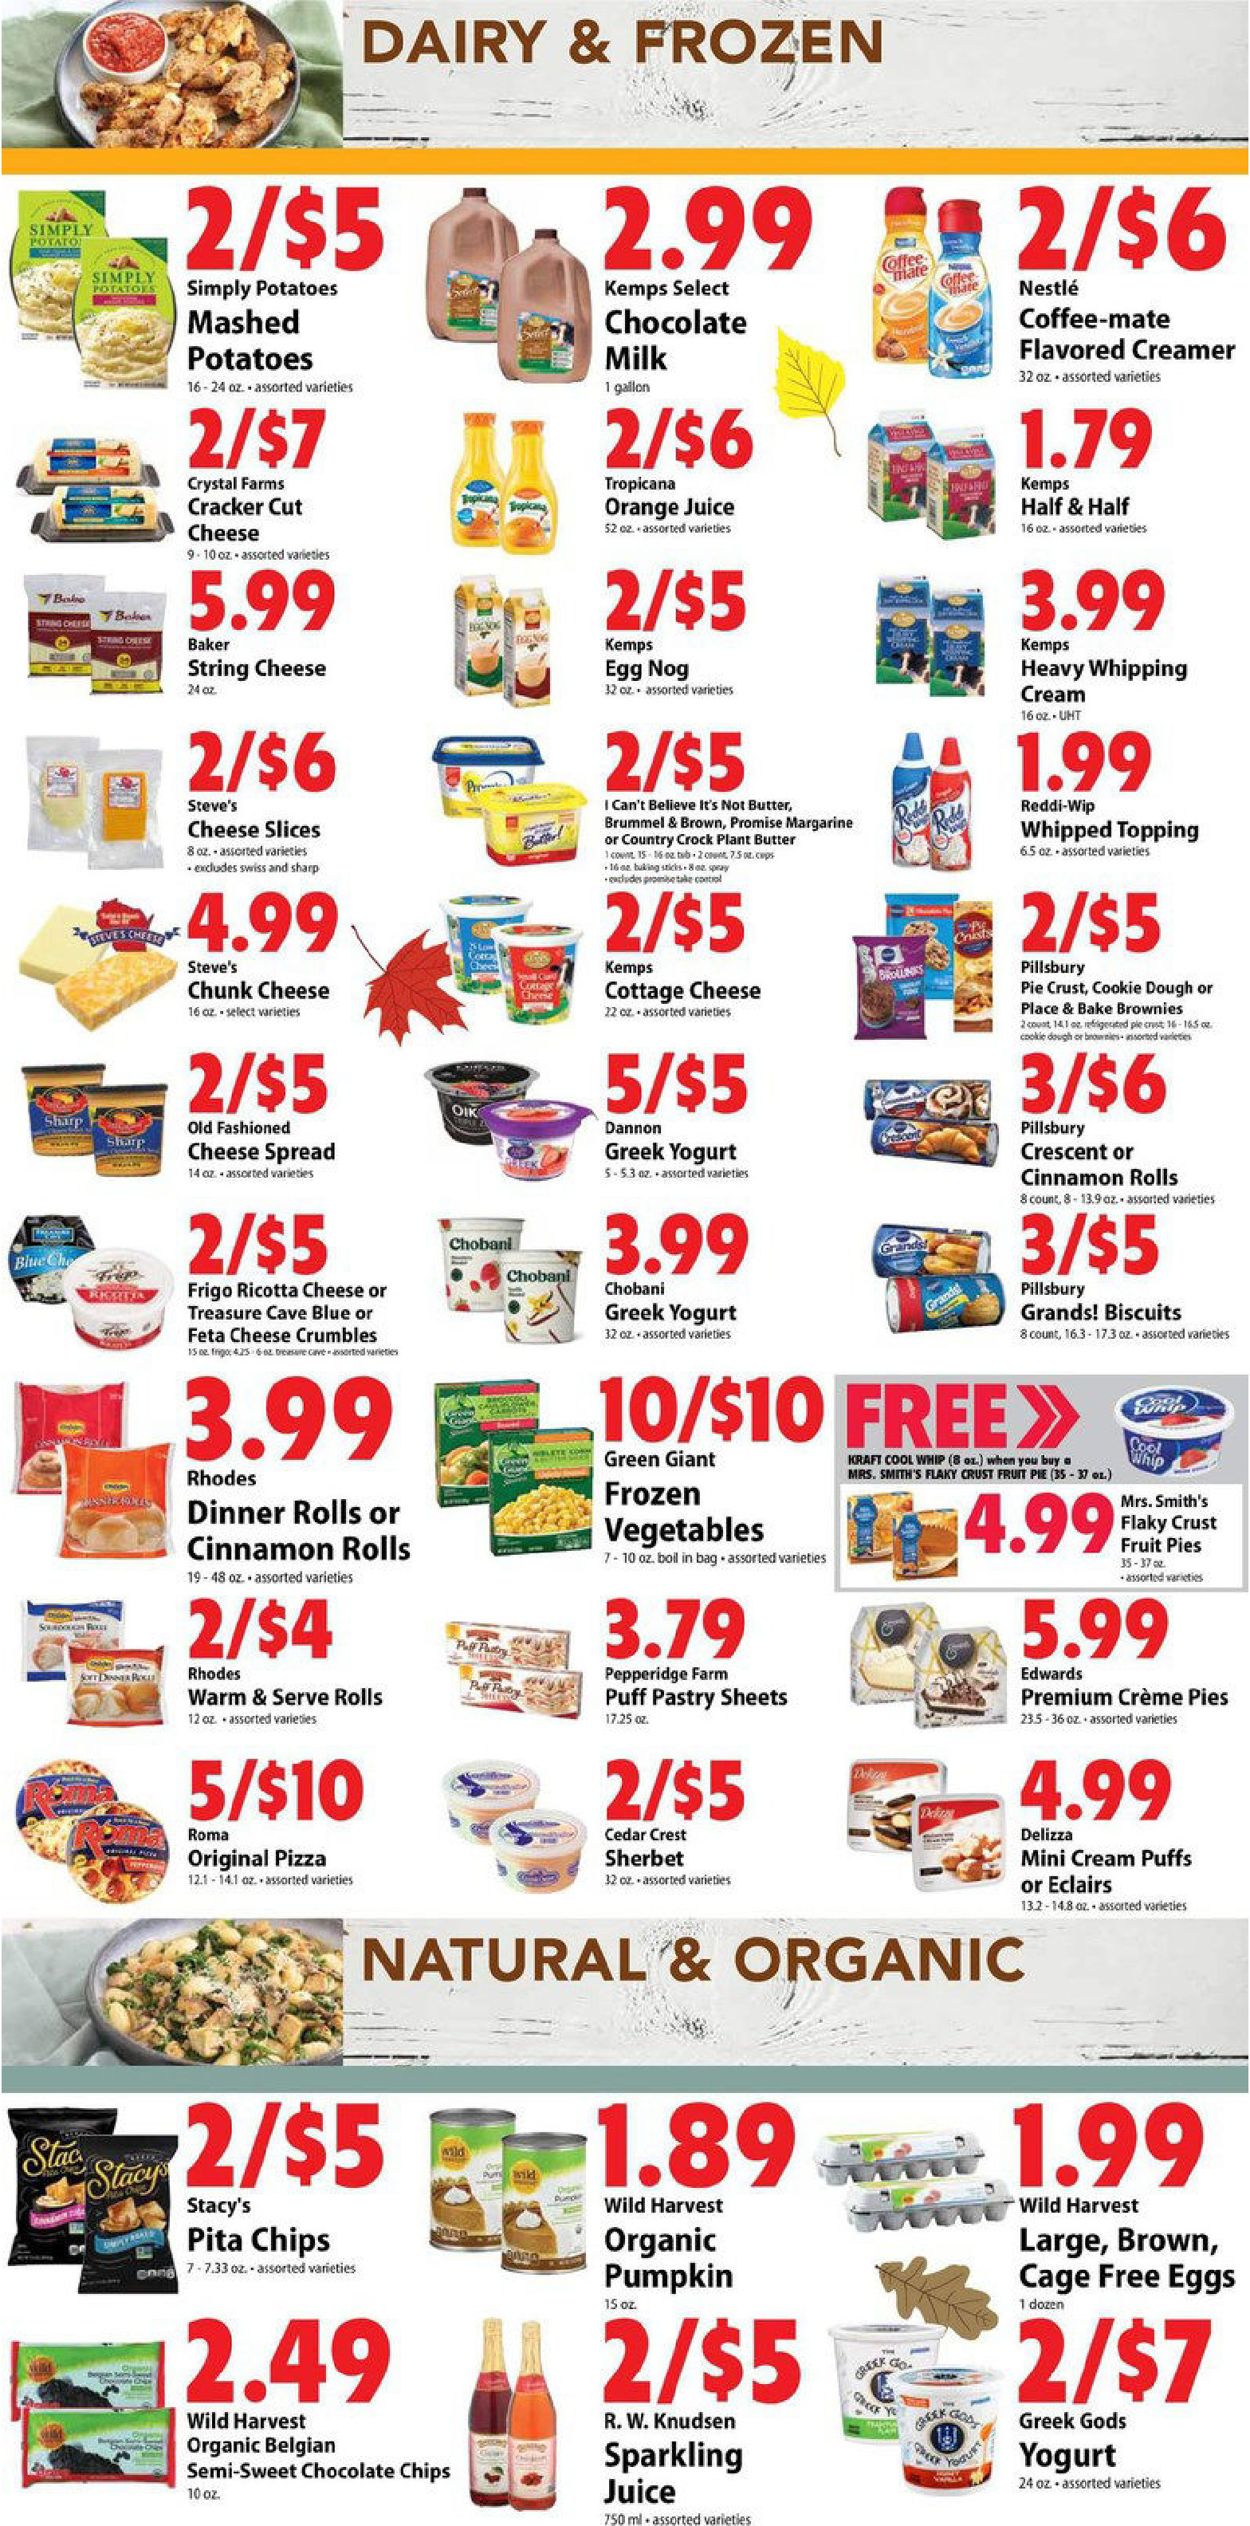 Festival Foods Current weekly ad 11/20 - 11/26/2019 [6] - frequent-ads.com